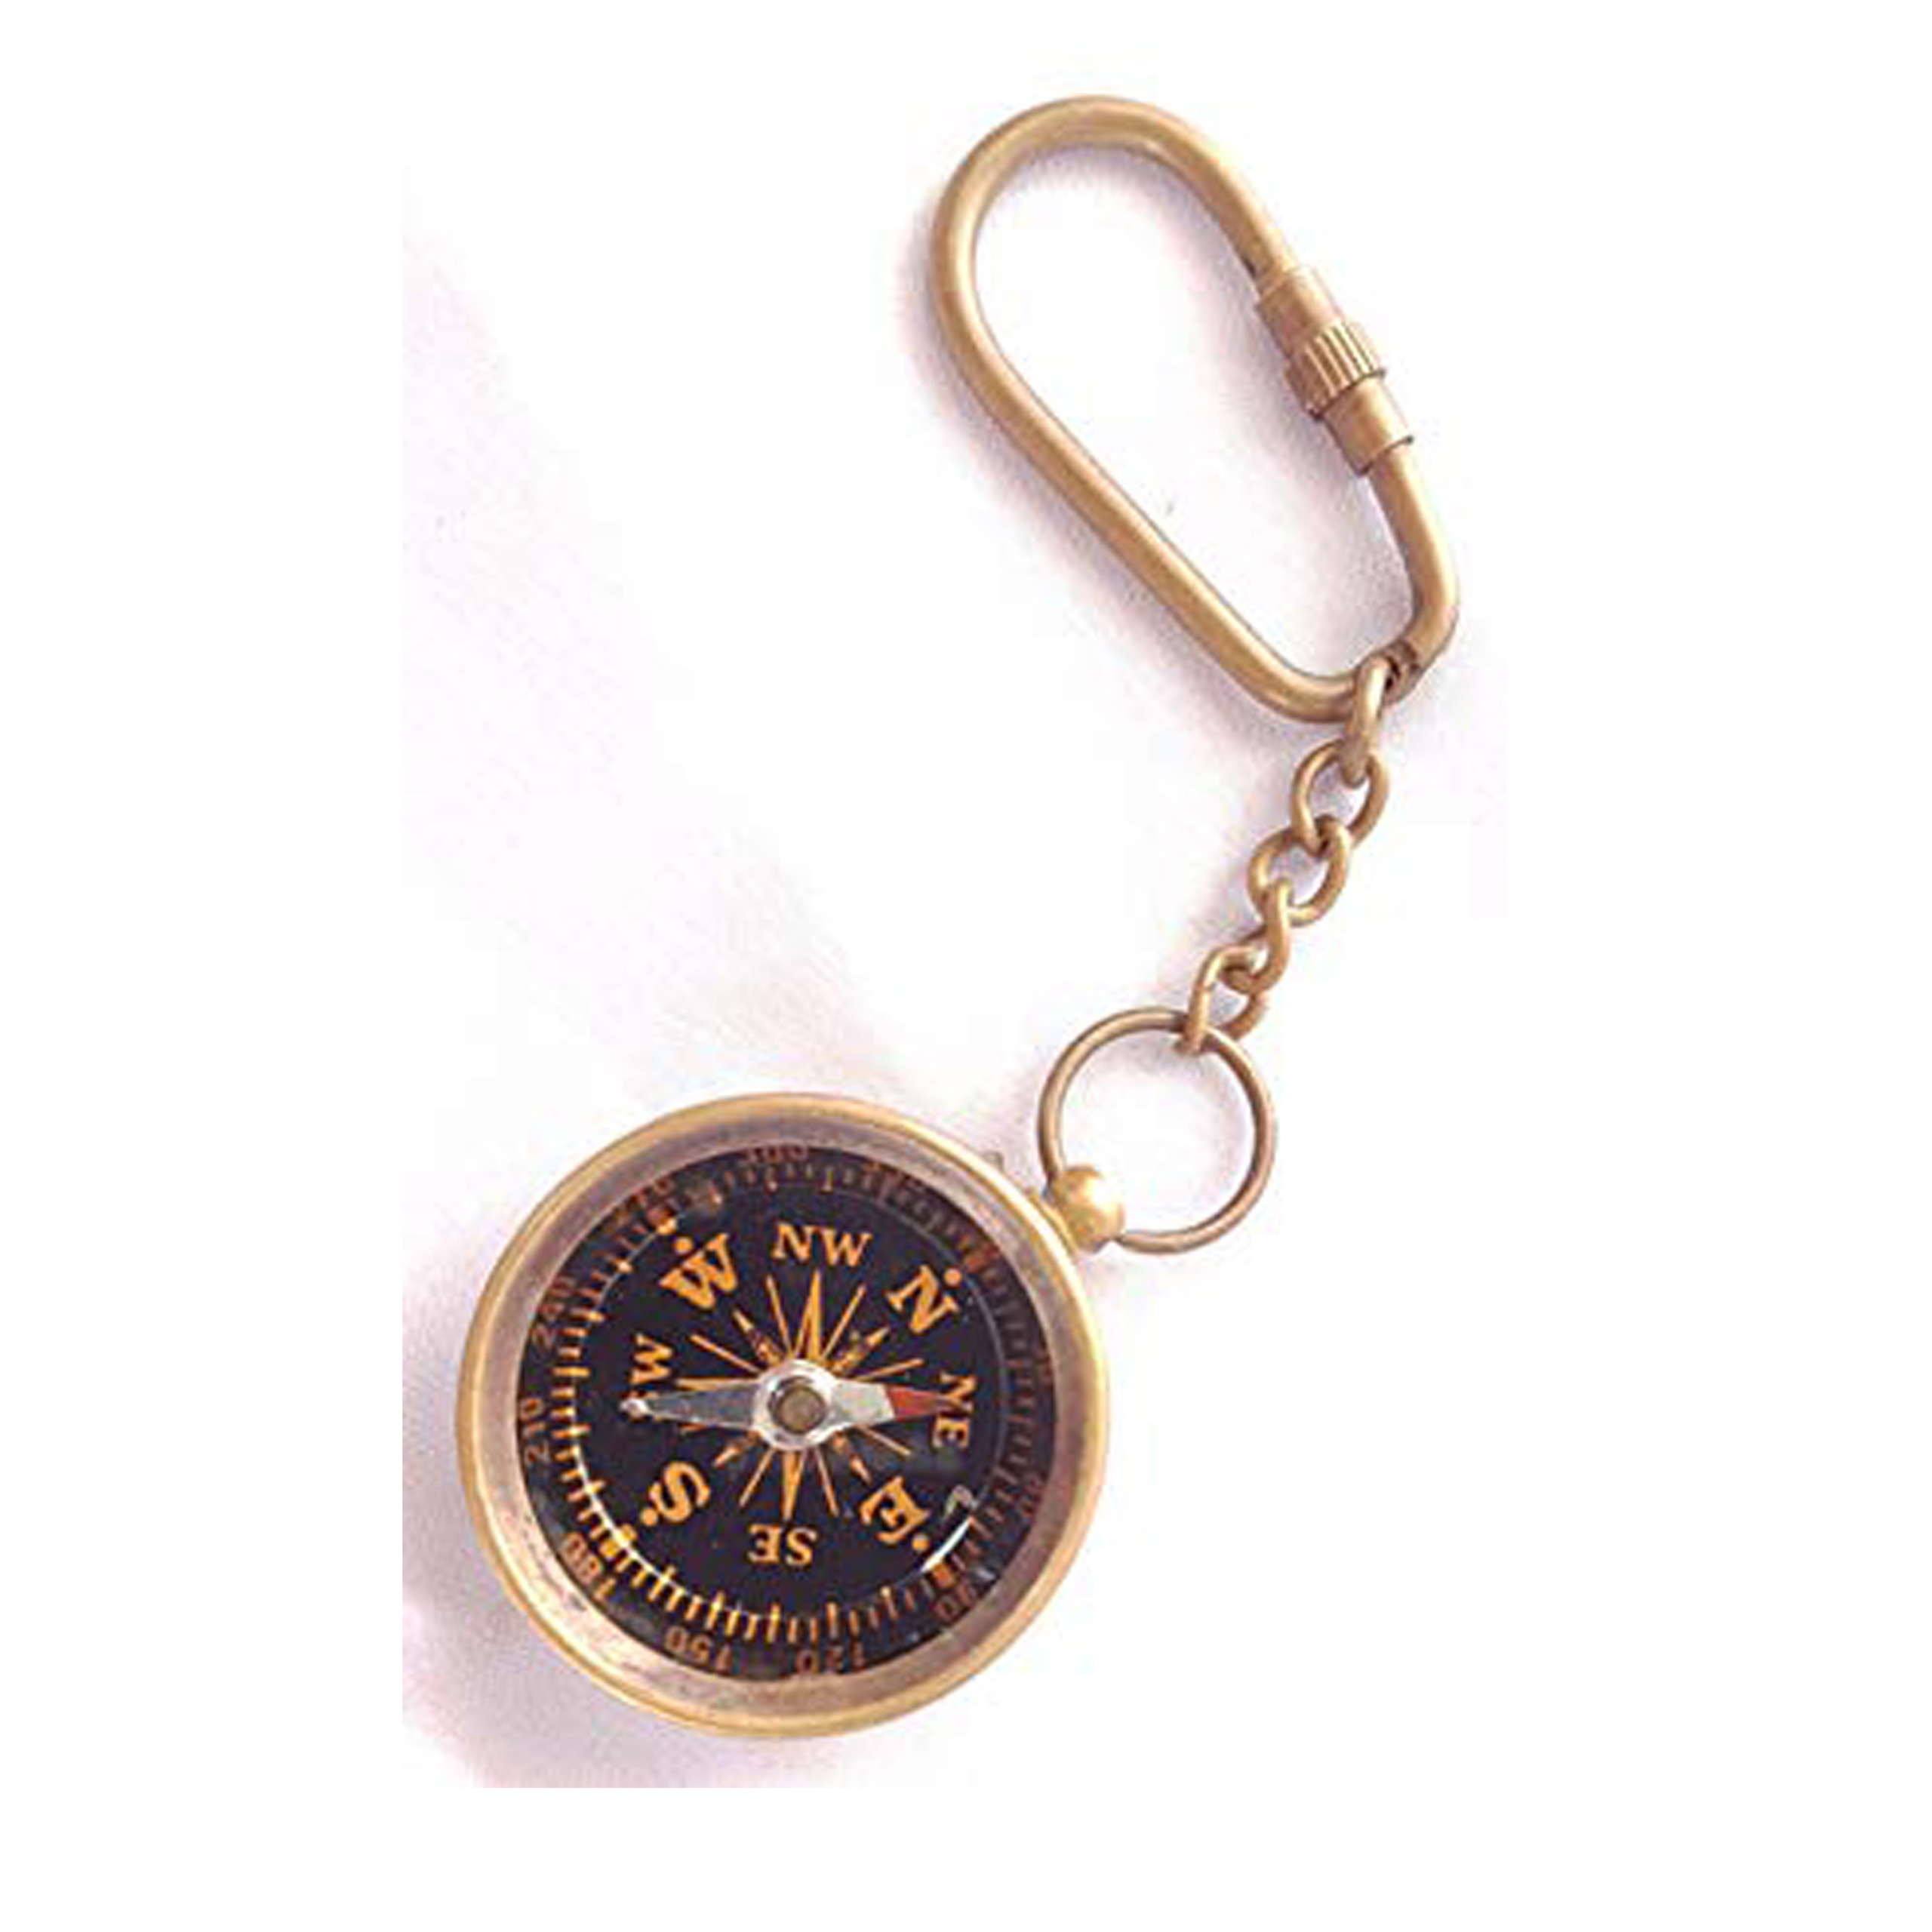 VINTAGE ANTIQUE NAUTICAL MARITIME SOLID BRASS COMPASS KEY CHAIN KEYRING GIFT 